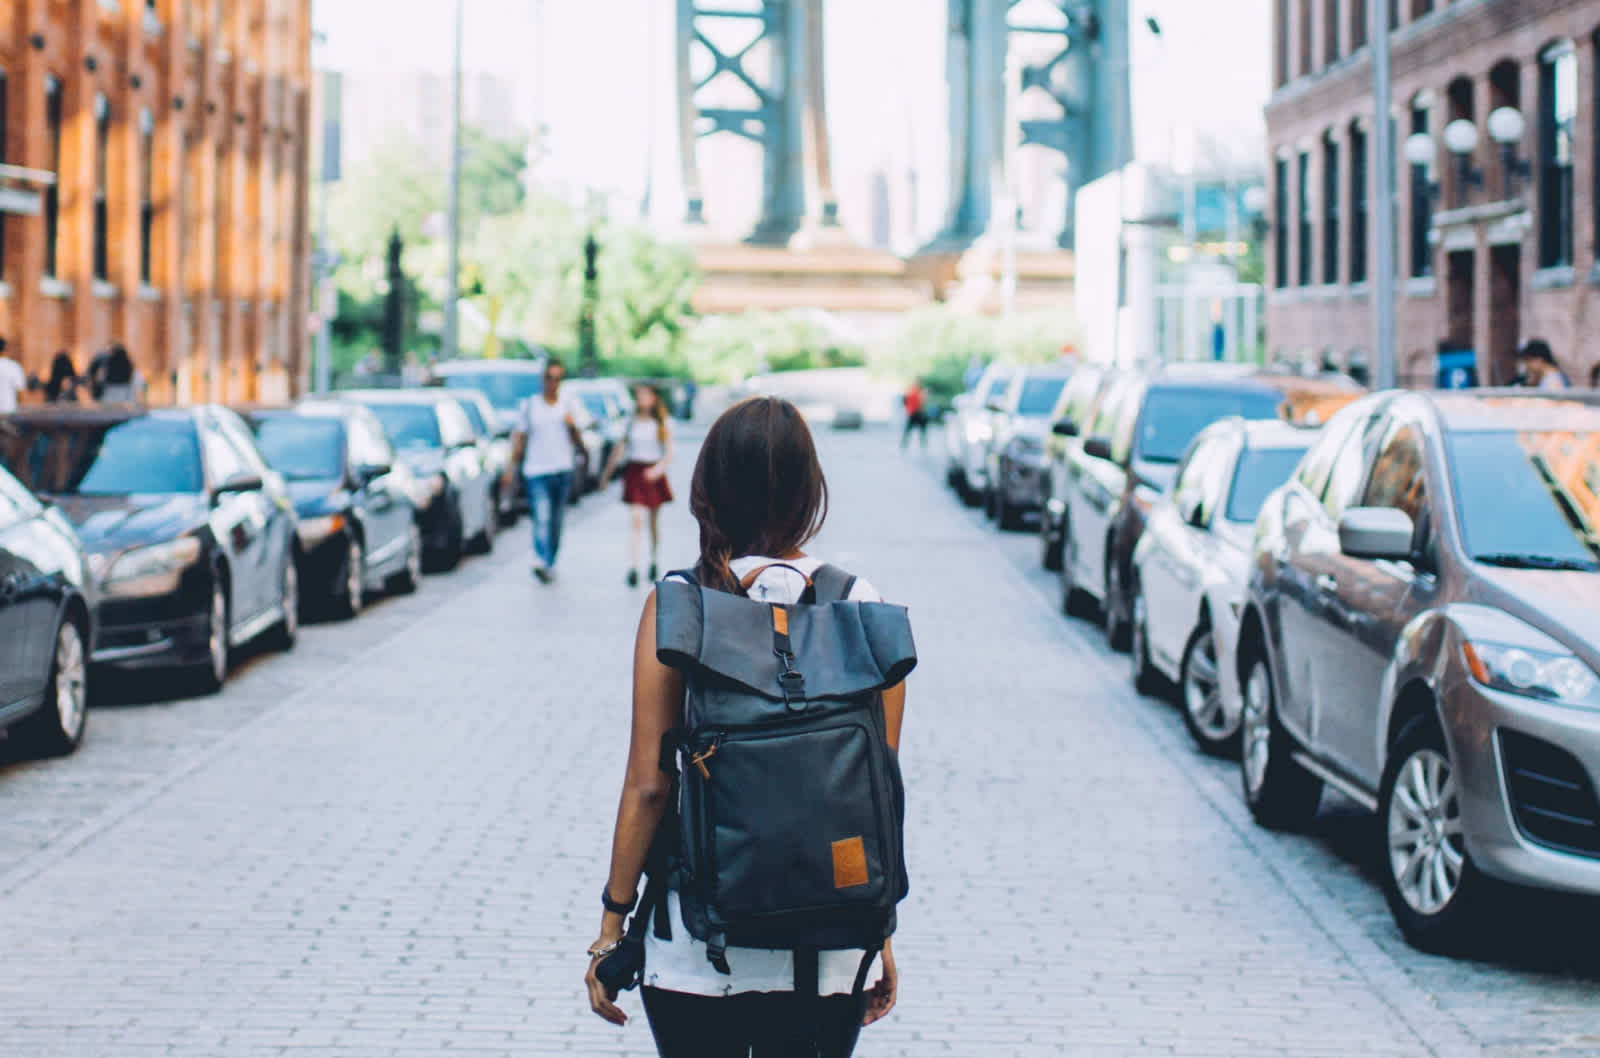 Woman with backpack stands in street with cars parked on both sides